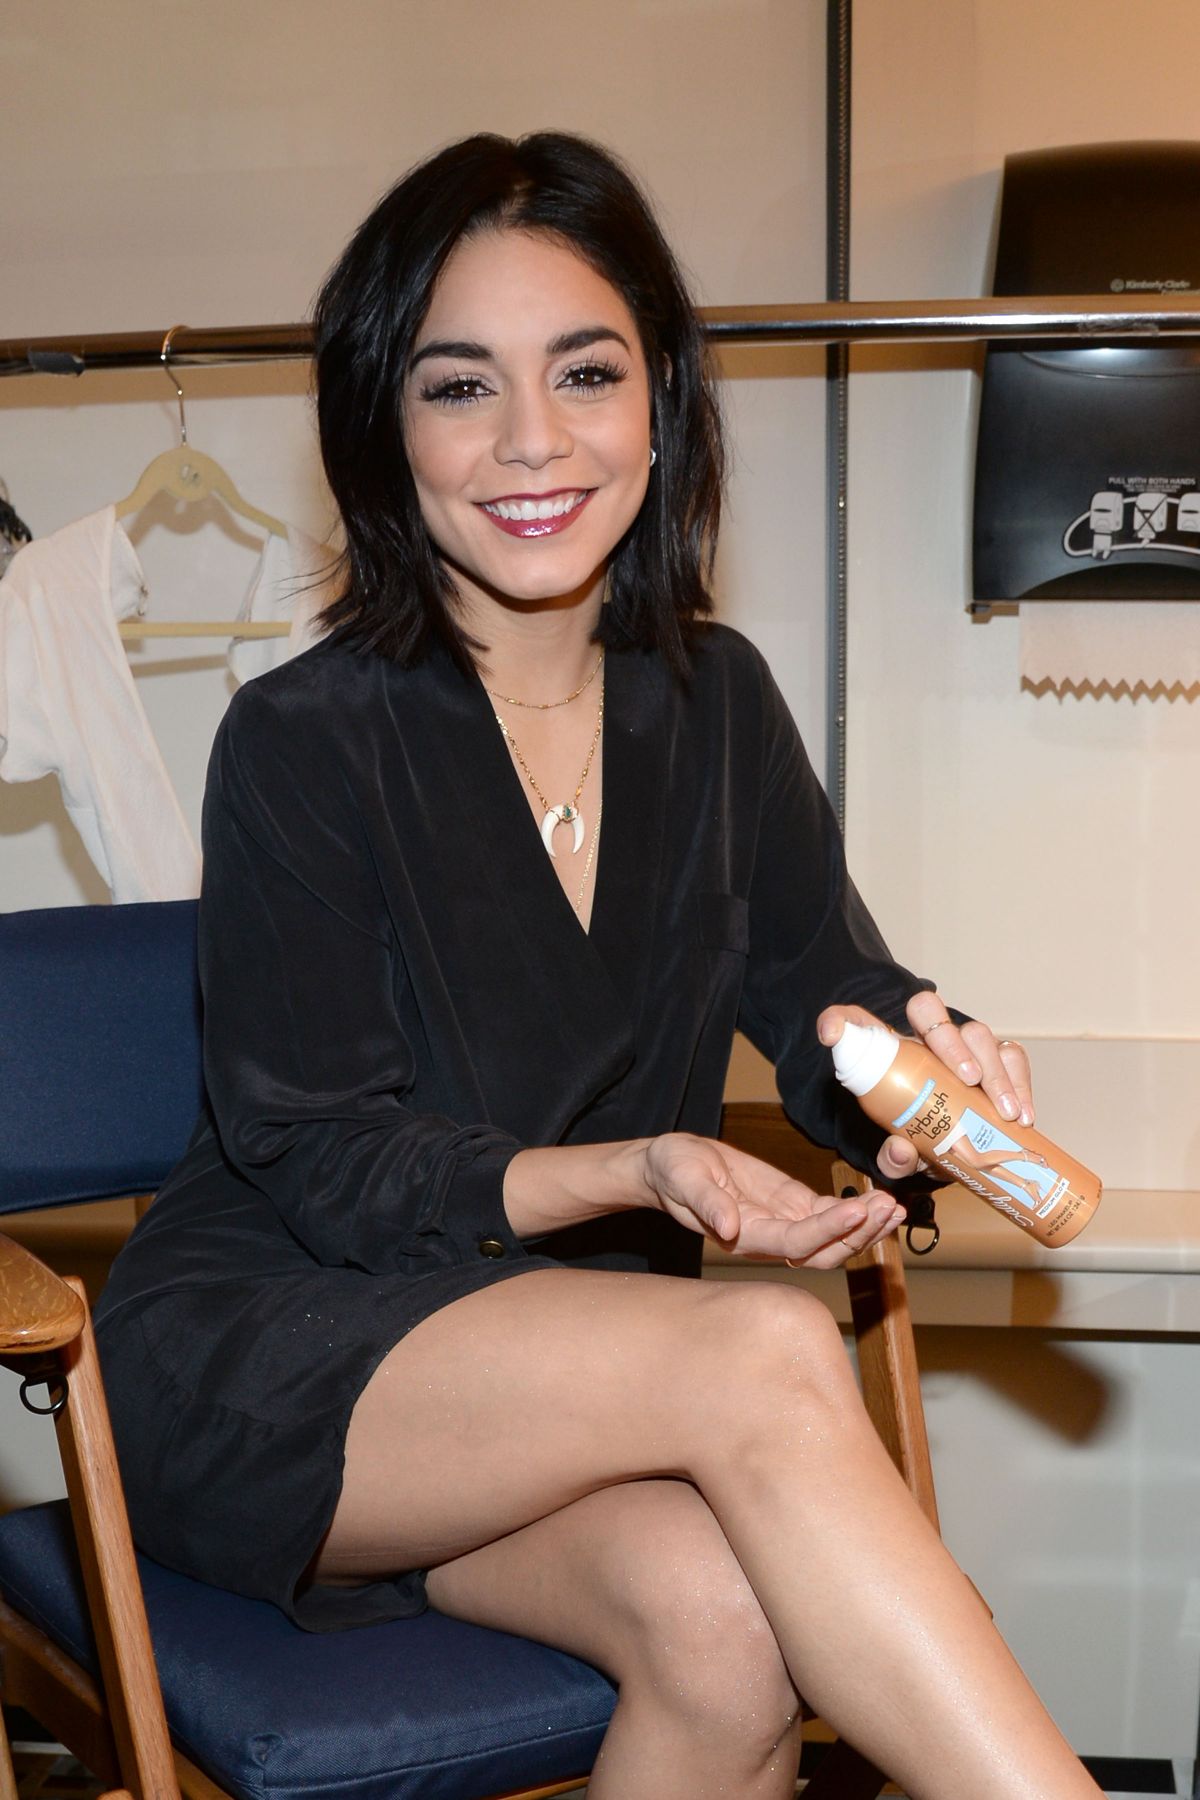 VANESSA HUDGENS in the Backstage at ABC Studios in New York – HawtCelebs